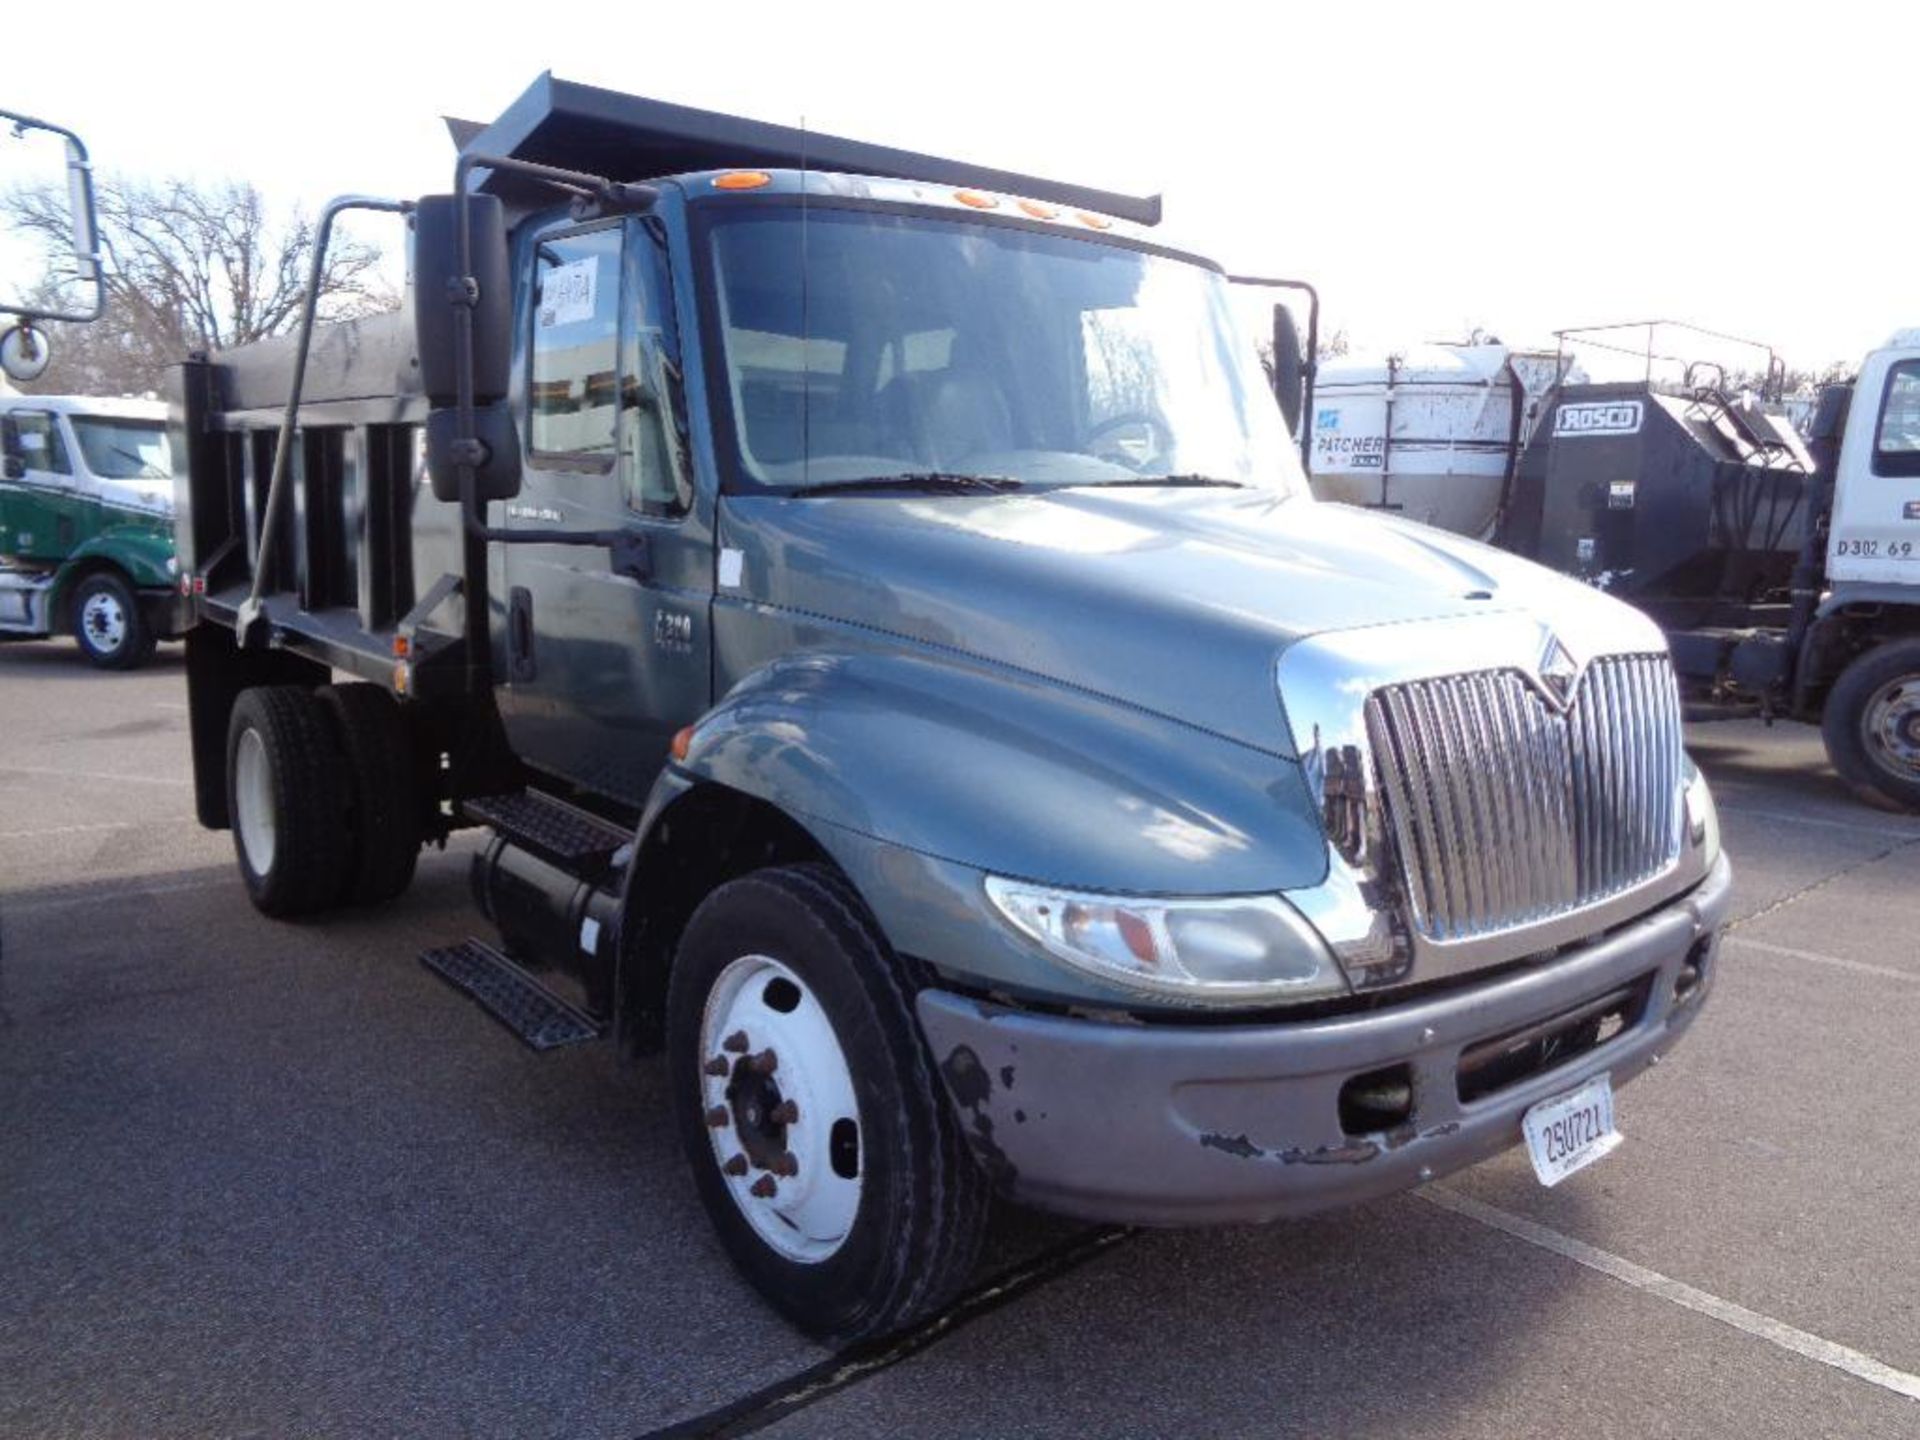 2006 IHC 4300 s/a Dump Truck s/n 1htmmaam07h453143, dt466 eng, auto trans, od reads 76237 miles, new - Image 2 of 10